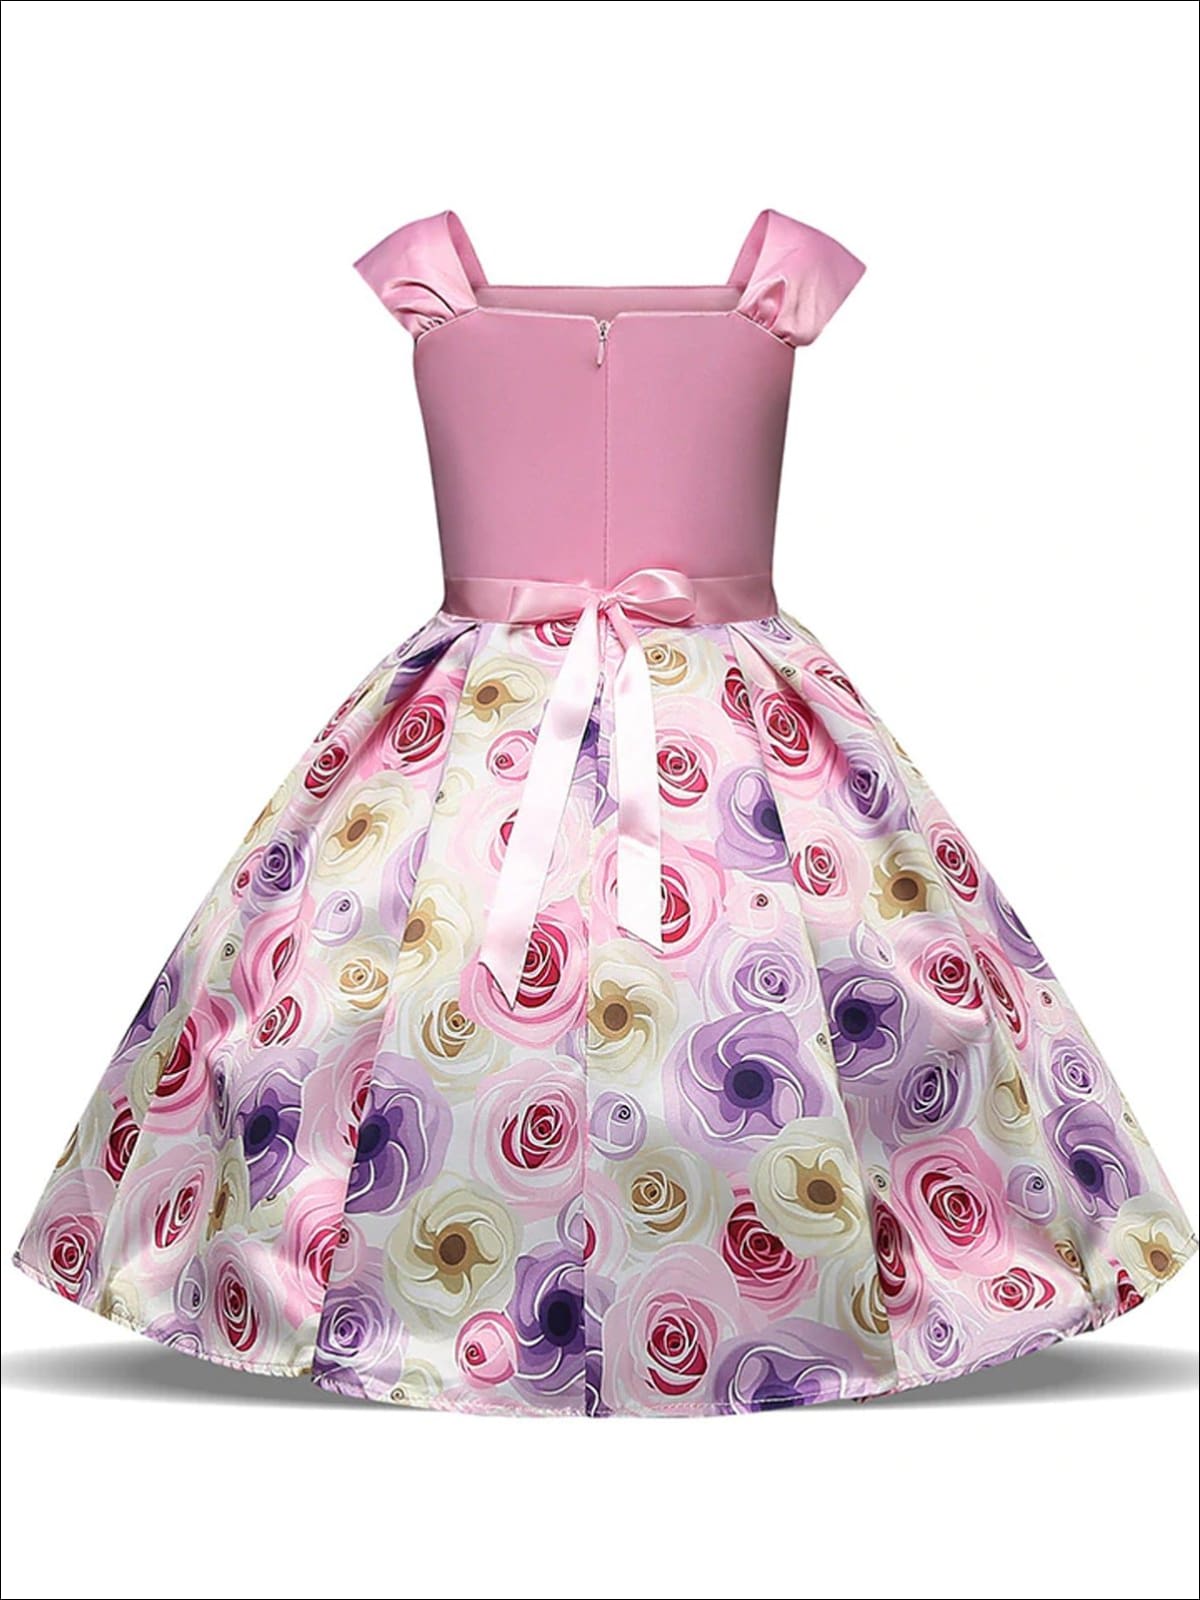 Girls Pink Sleeveless Floral Skirt Bow Applique Special Occasion Dress - Girls Spring Dressy Dress